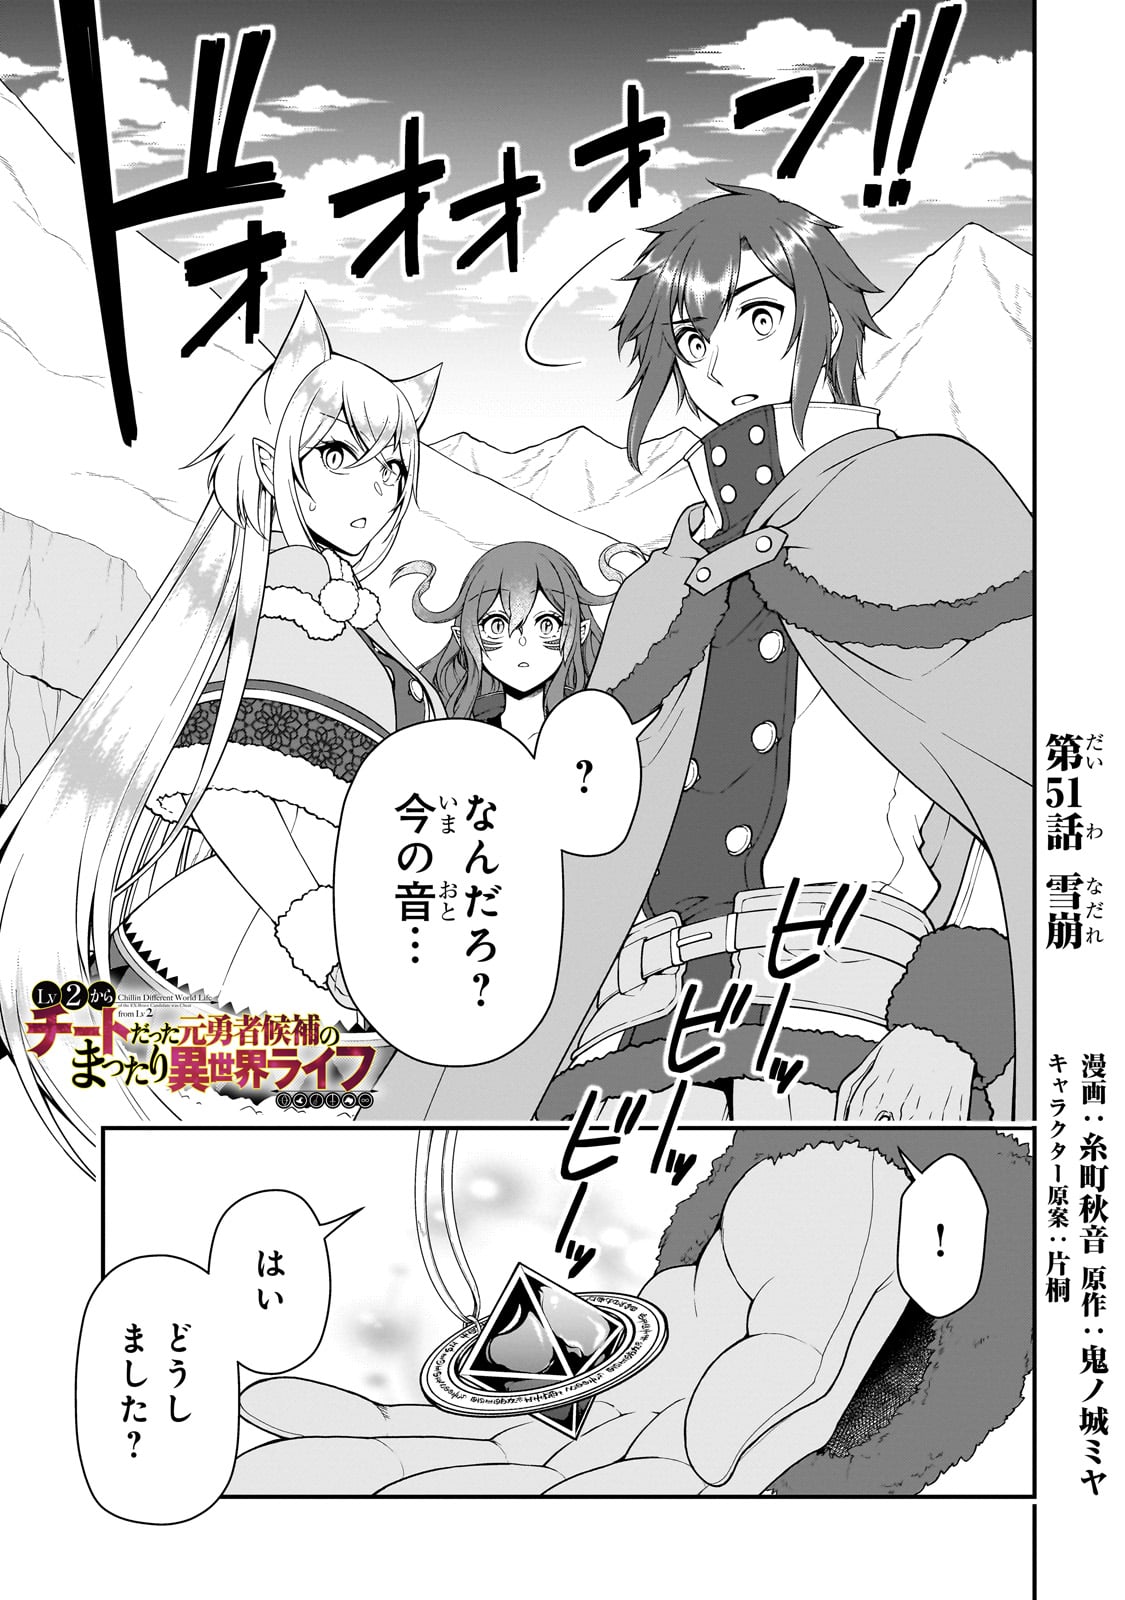 Ex-Hero Candidates, Who Turned Out To Be A Cheat From Lv2, Laid-back Life In Another World - Chapter 51 - Page 1